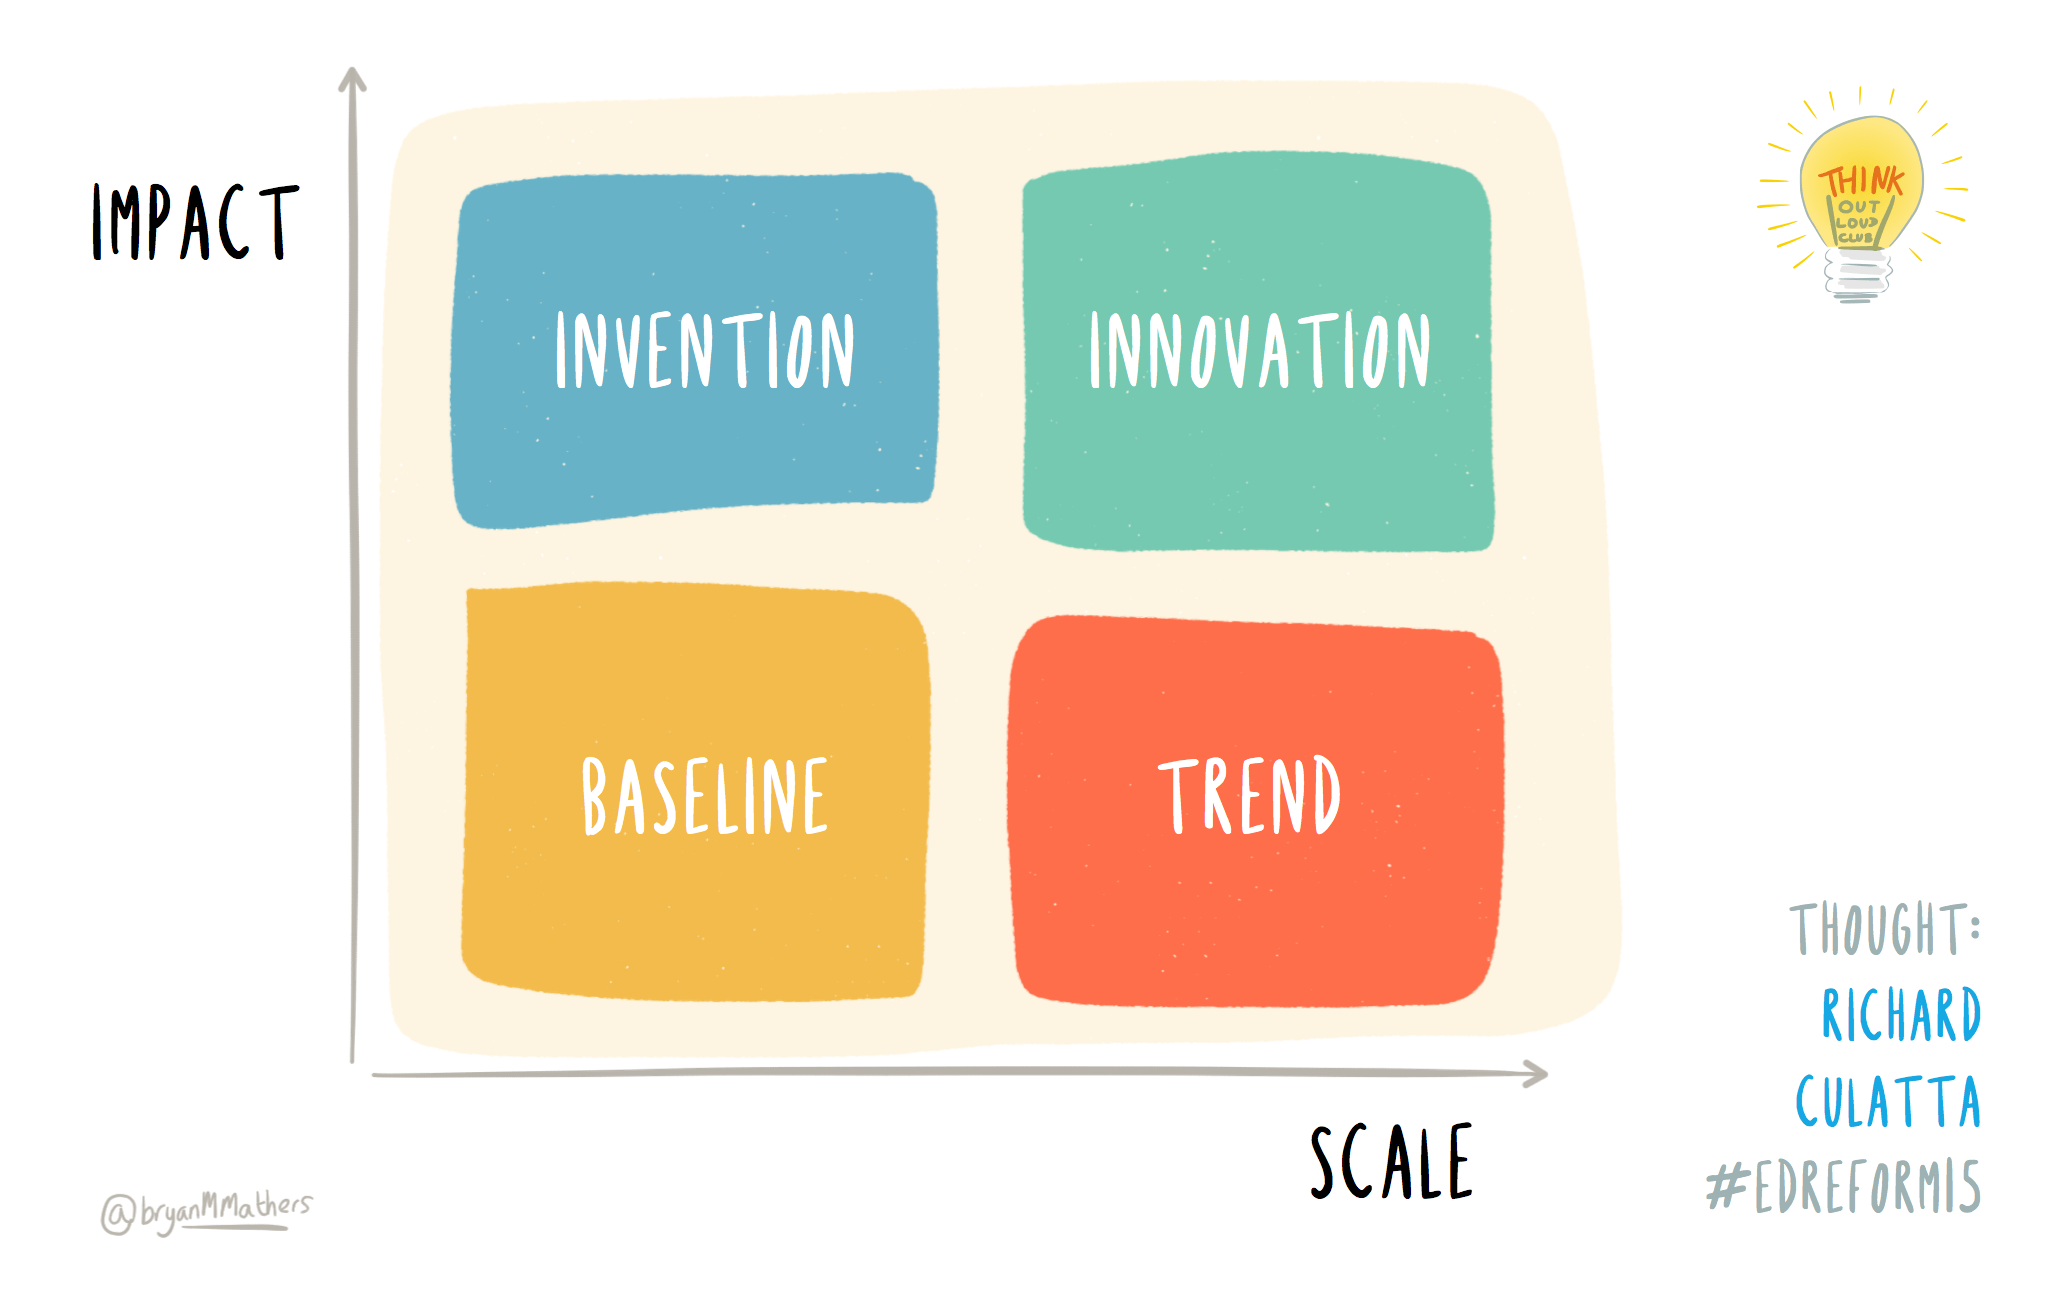 Impact and Scale